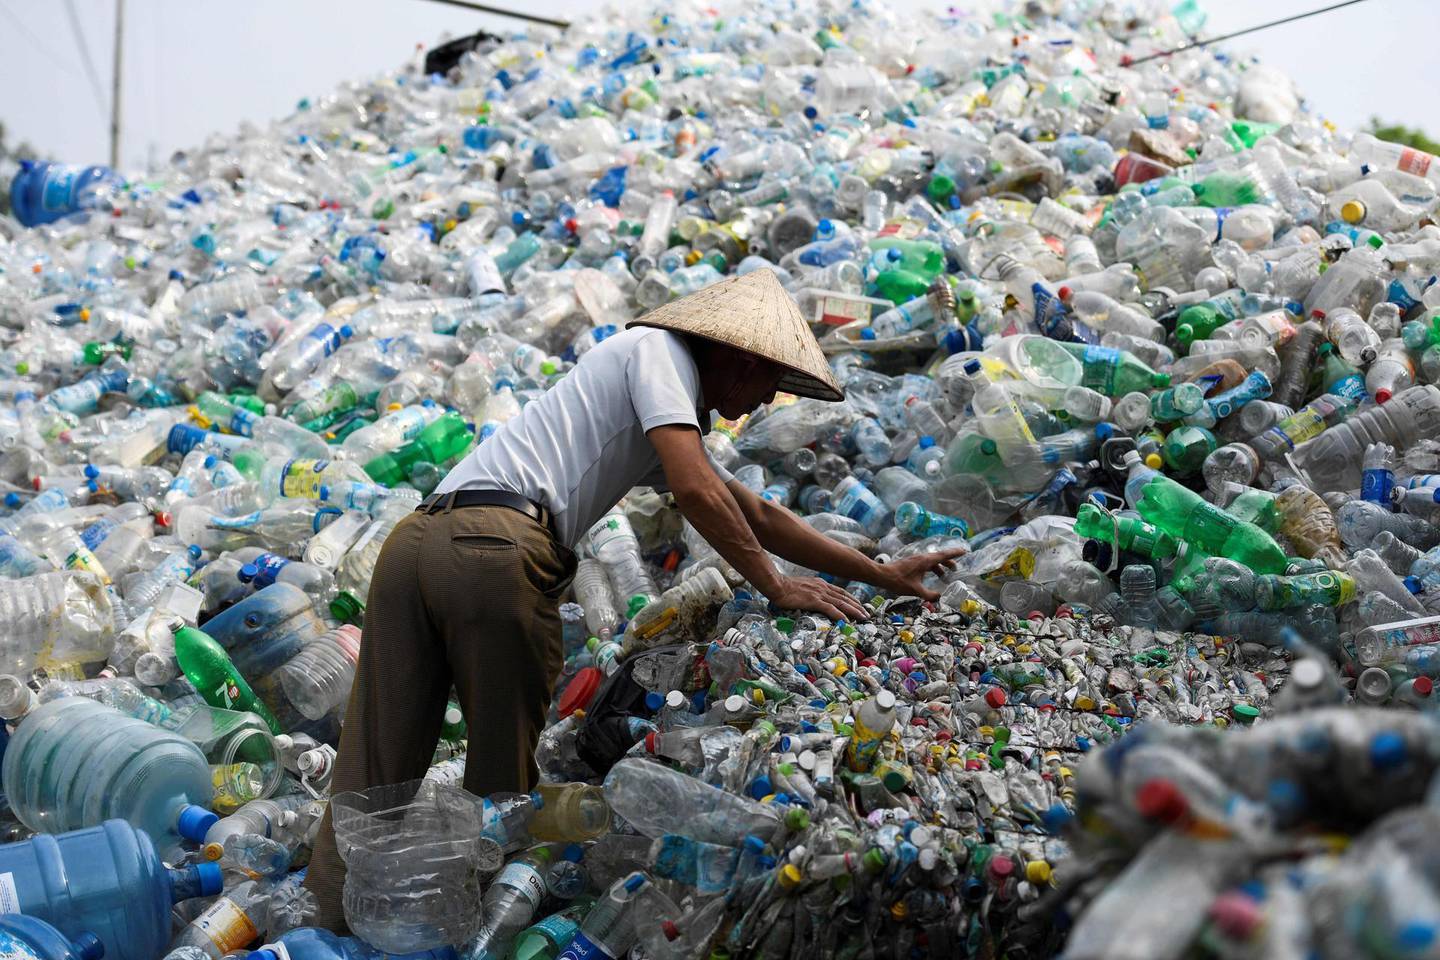 This picture taken on June 4, 2018 shows a man sorting through used plastic bottles at a junkyard in Hanoi. About eight million tonnes of plastic waste are dumped into the world's oceans every year - the equivalent of one garbage truck of plastic being tipped into the sea every minute... of every day. Over half comes from five Asian countries: China, Indonesia, the Philippines, Thailand and Vietnam, according to a 2015 study in Science journal. / AFP / Nhac NGUYEN
